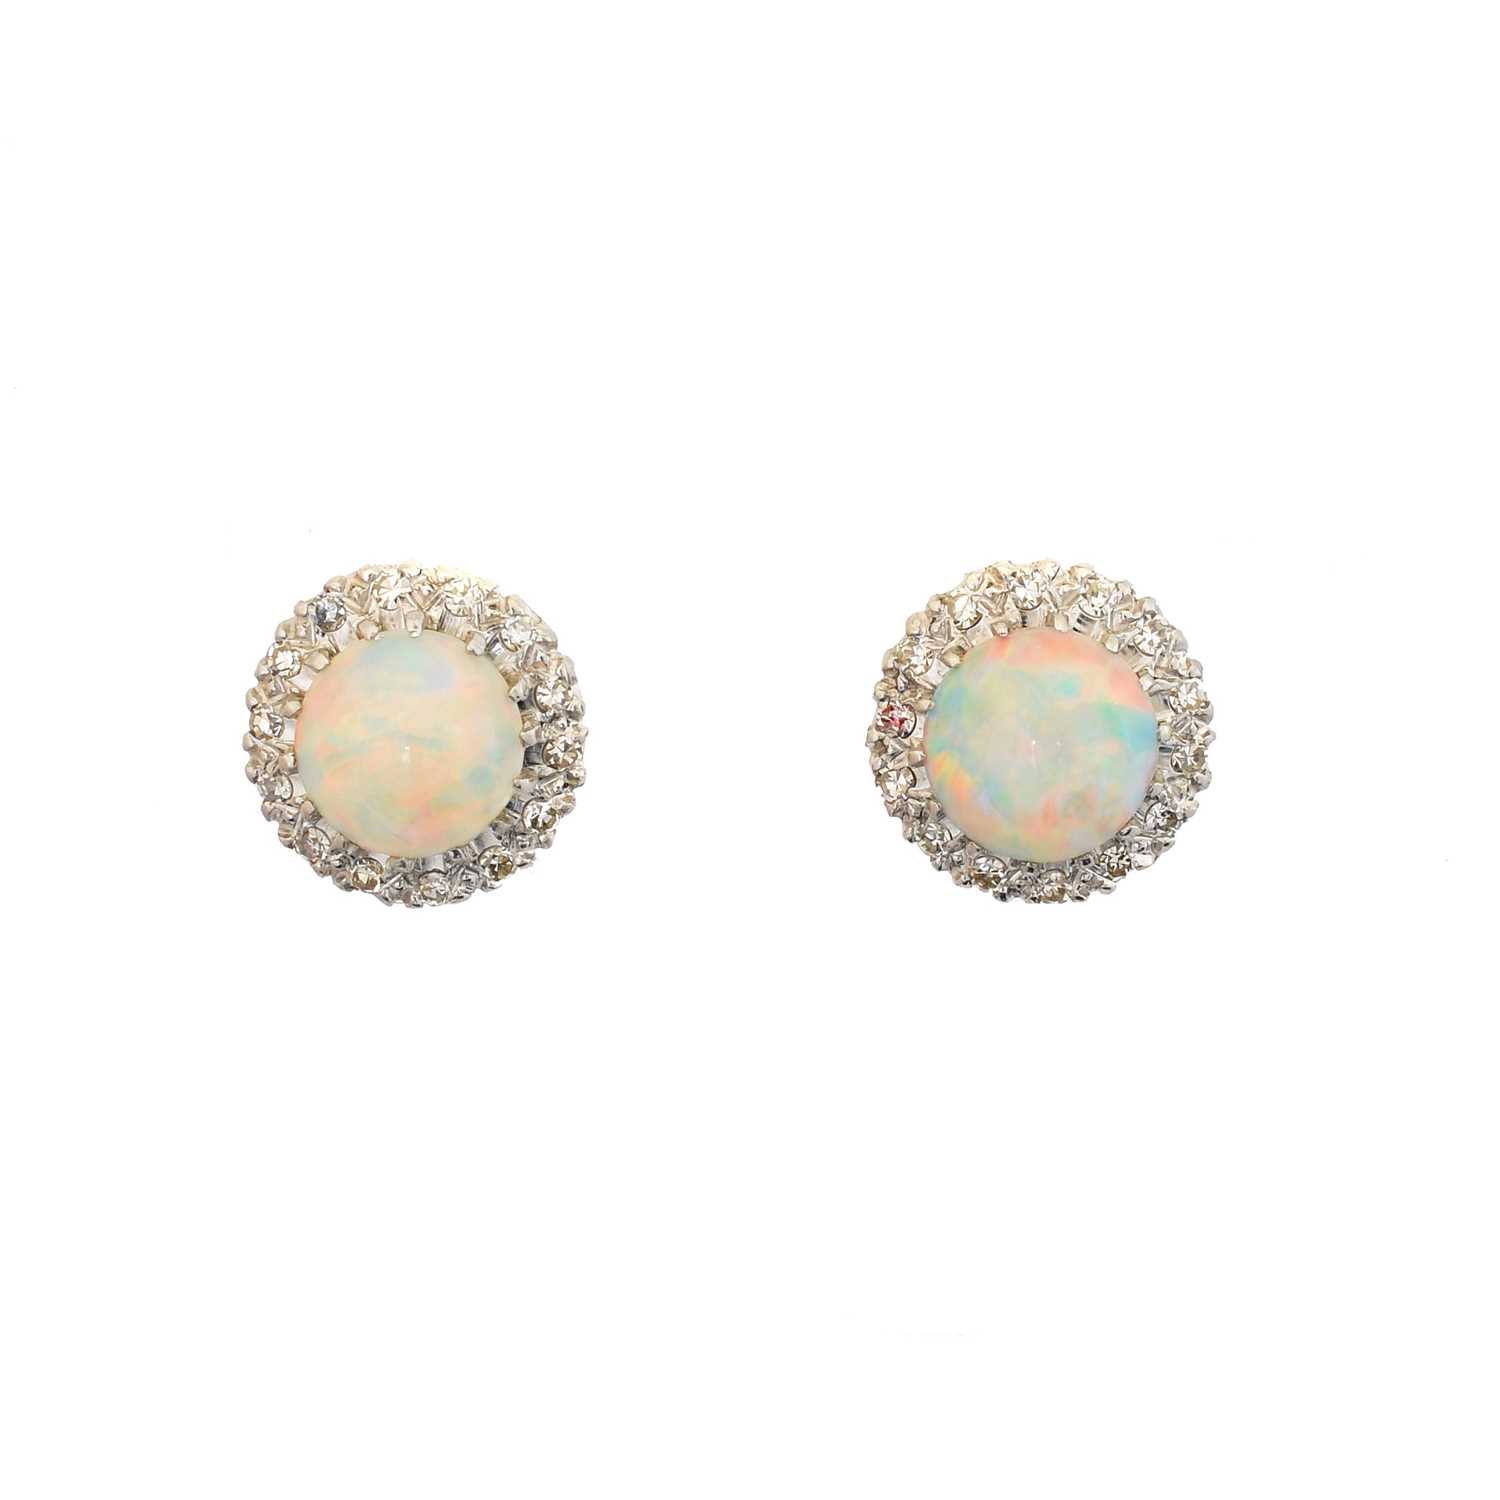 Lot A pair of opal and diamond earrings